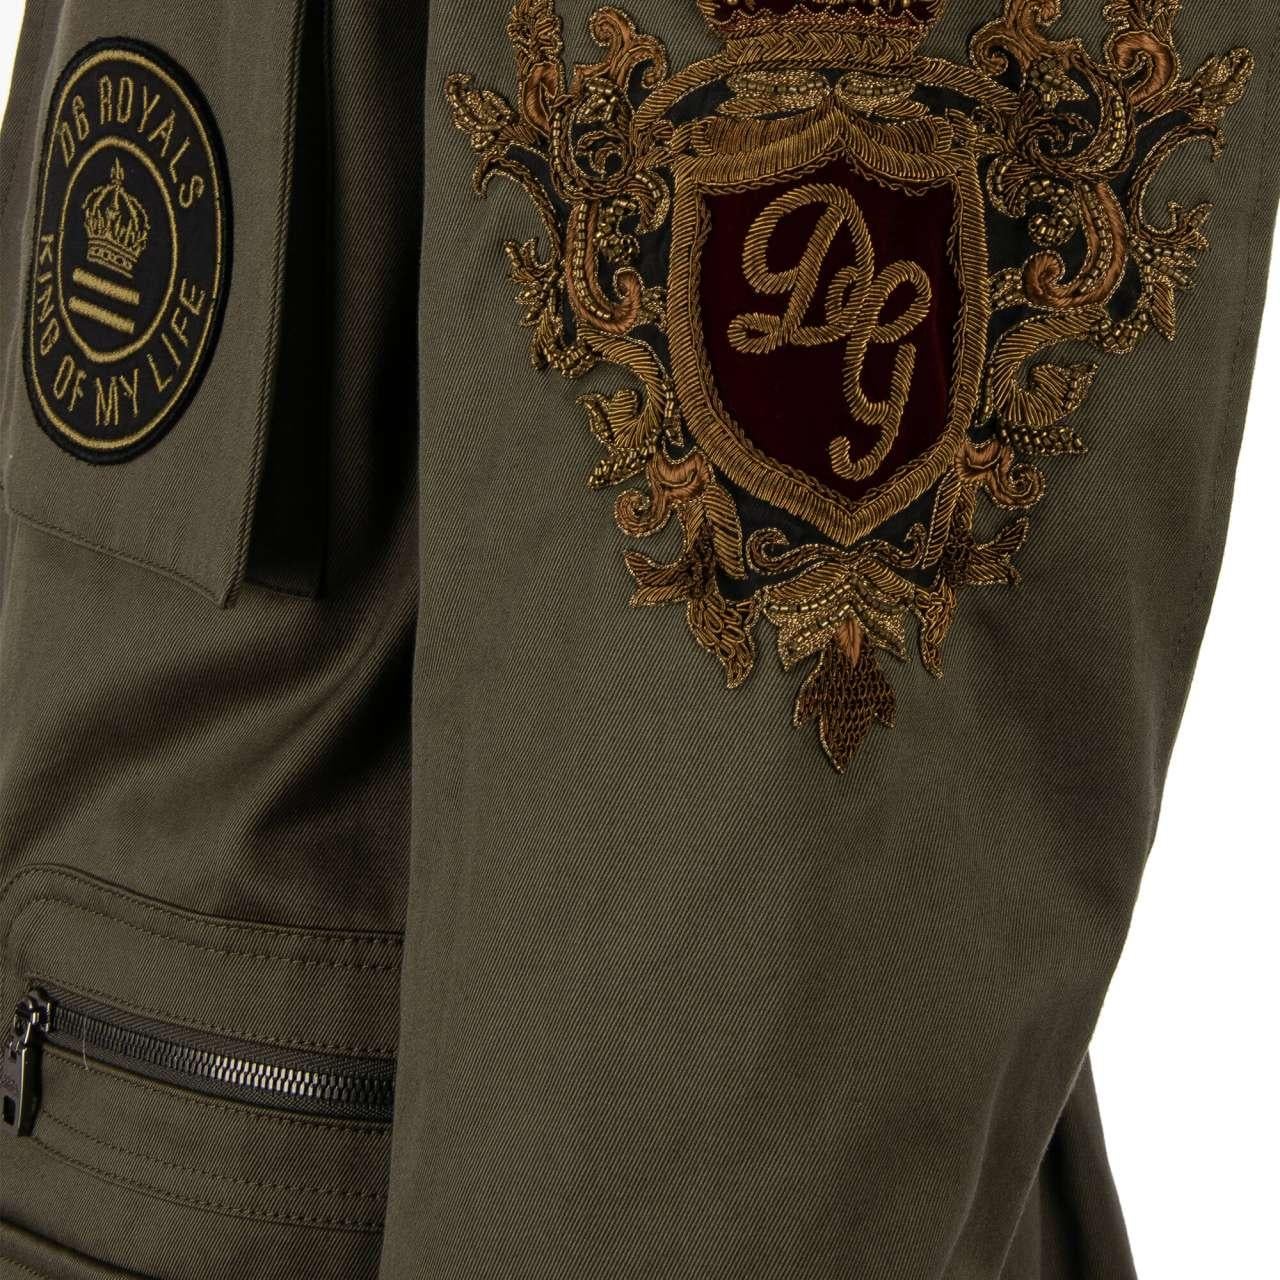 D&G Military Canvas Jacket DG LOVE with Embroidery und Pockets Khaki 54 For Sale 3